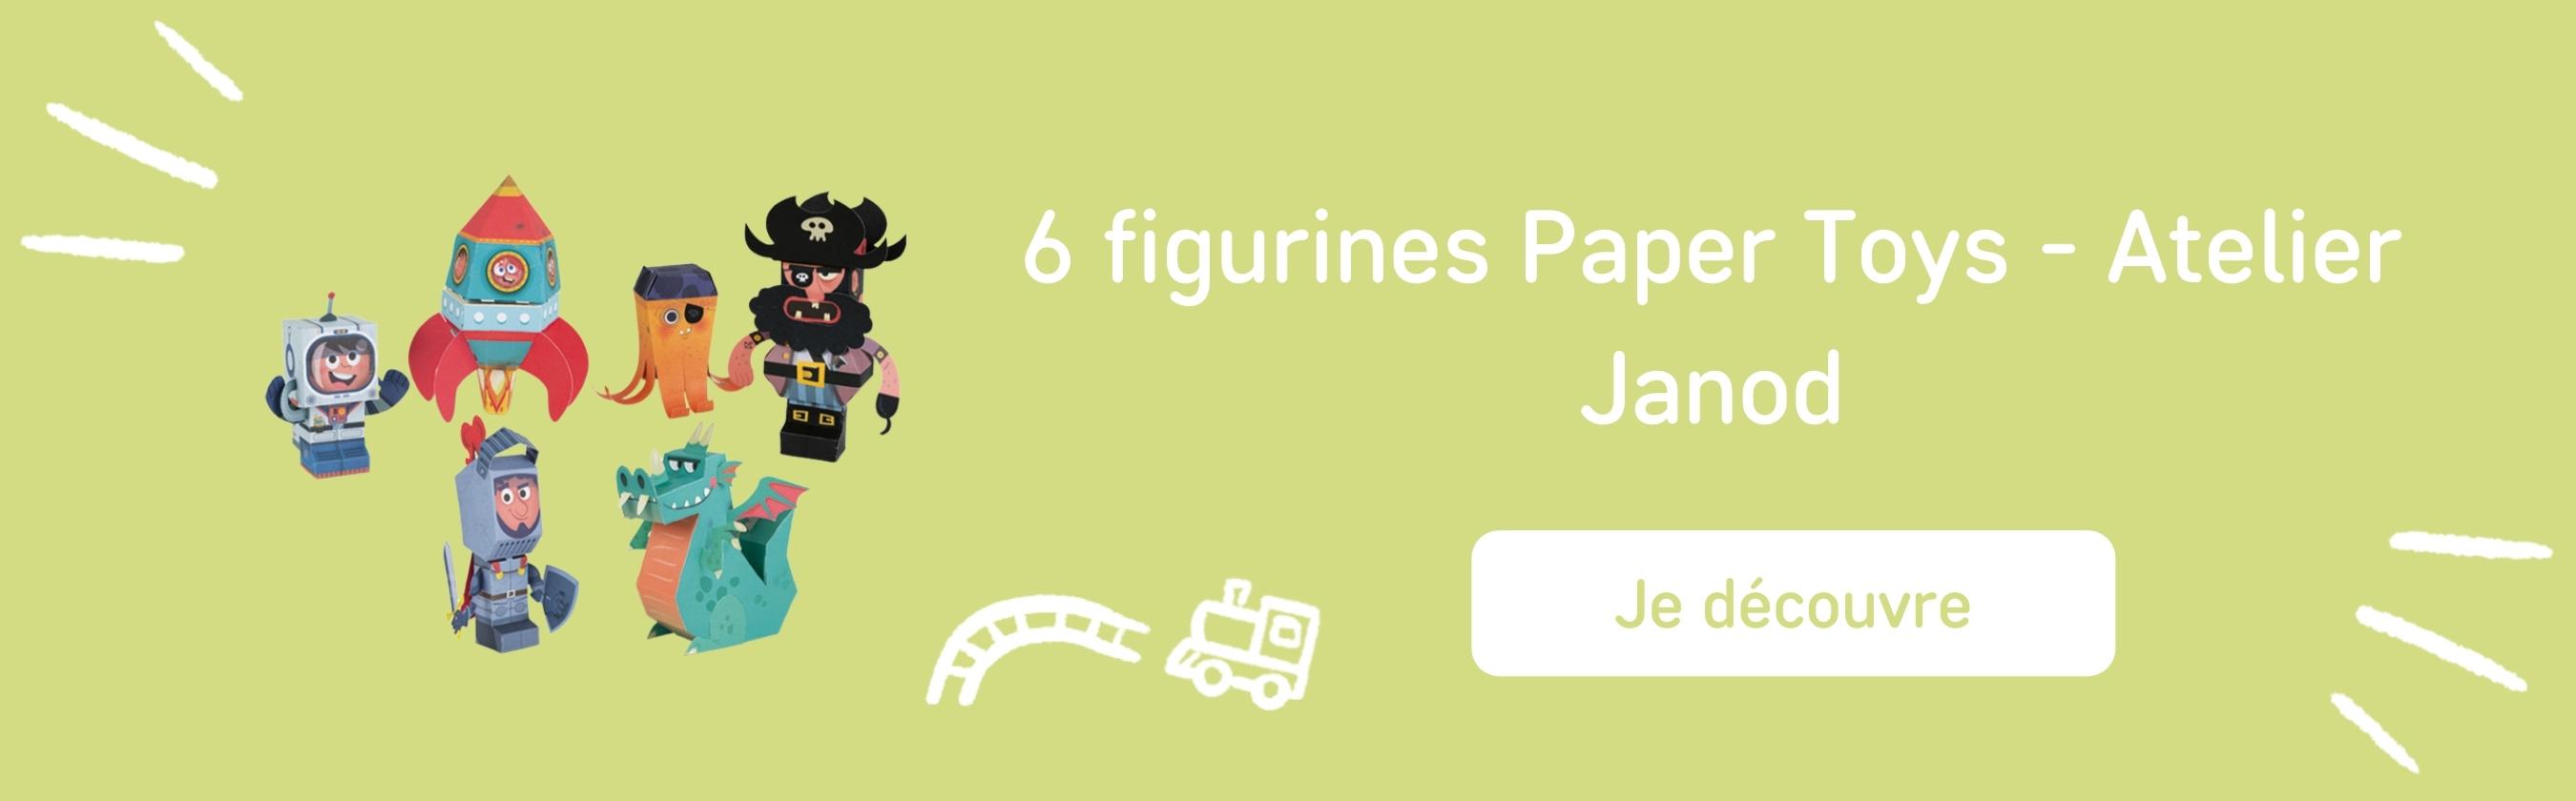 6 figurines Paper Toys - Atelier Janod